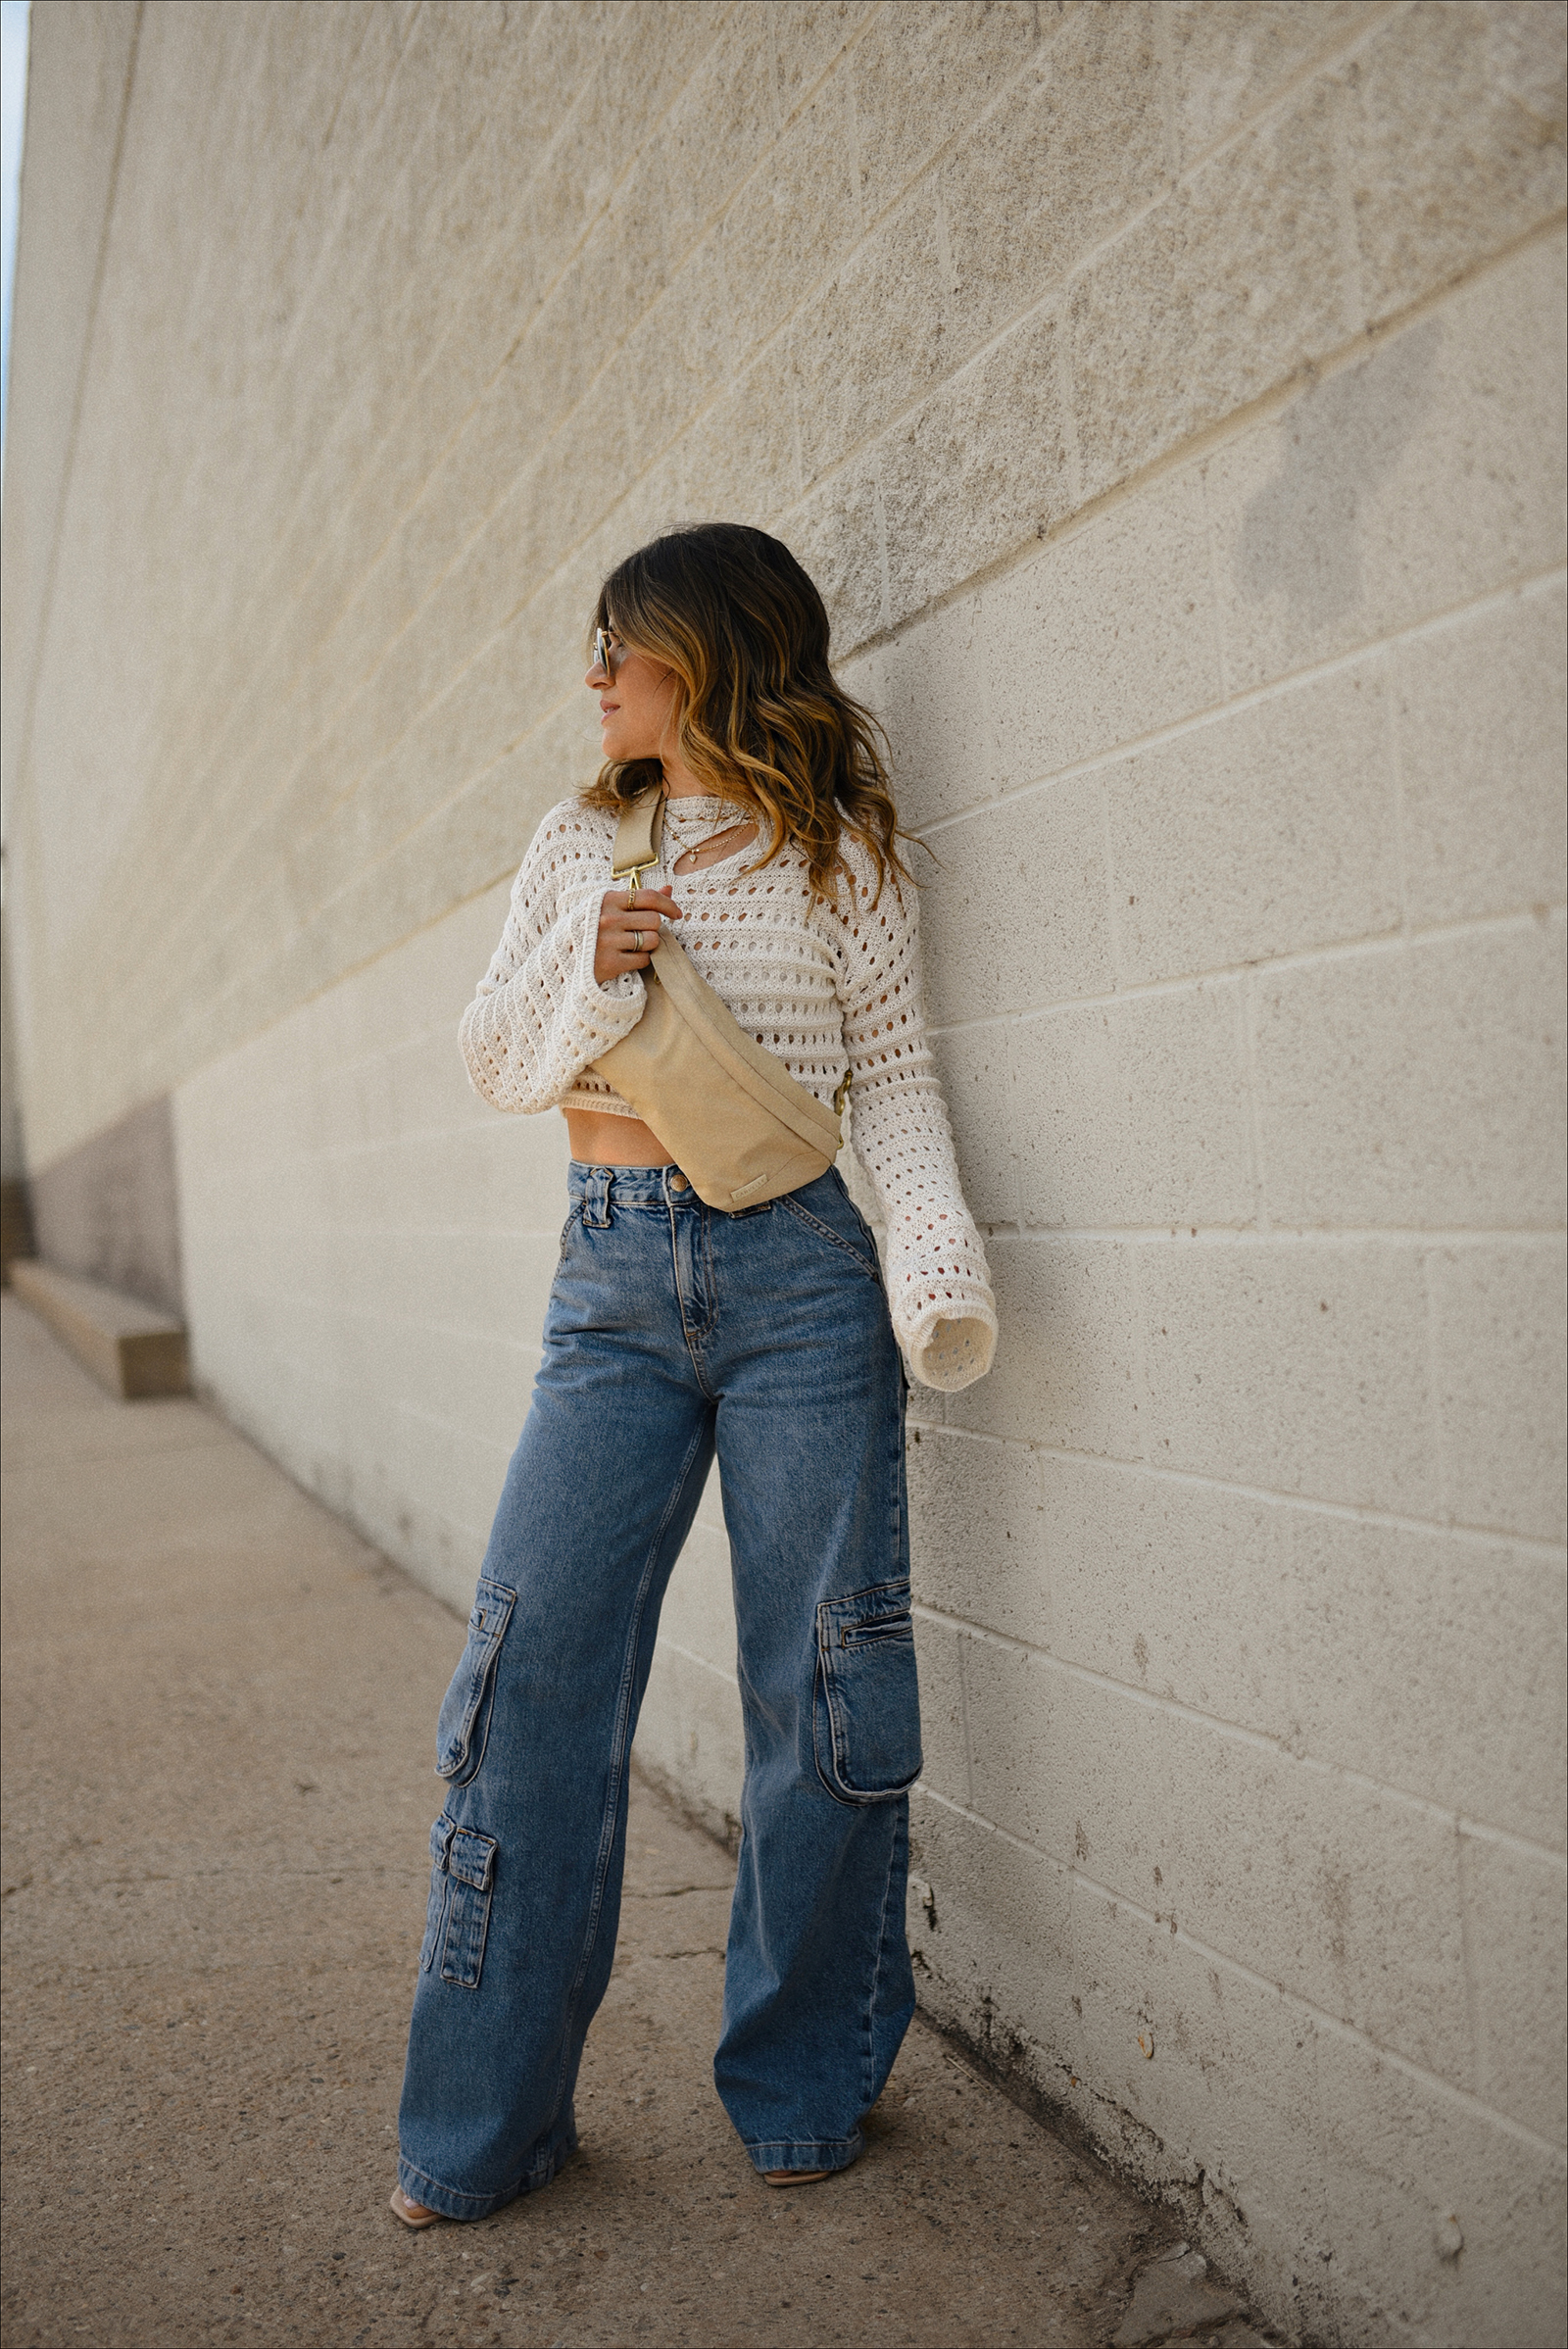 Carolina Hellal of Chic Talk wearing denim cargo jeans for summer via Mango, knit sweater from Amazon fashion, and a fanny pack via Canvelle